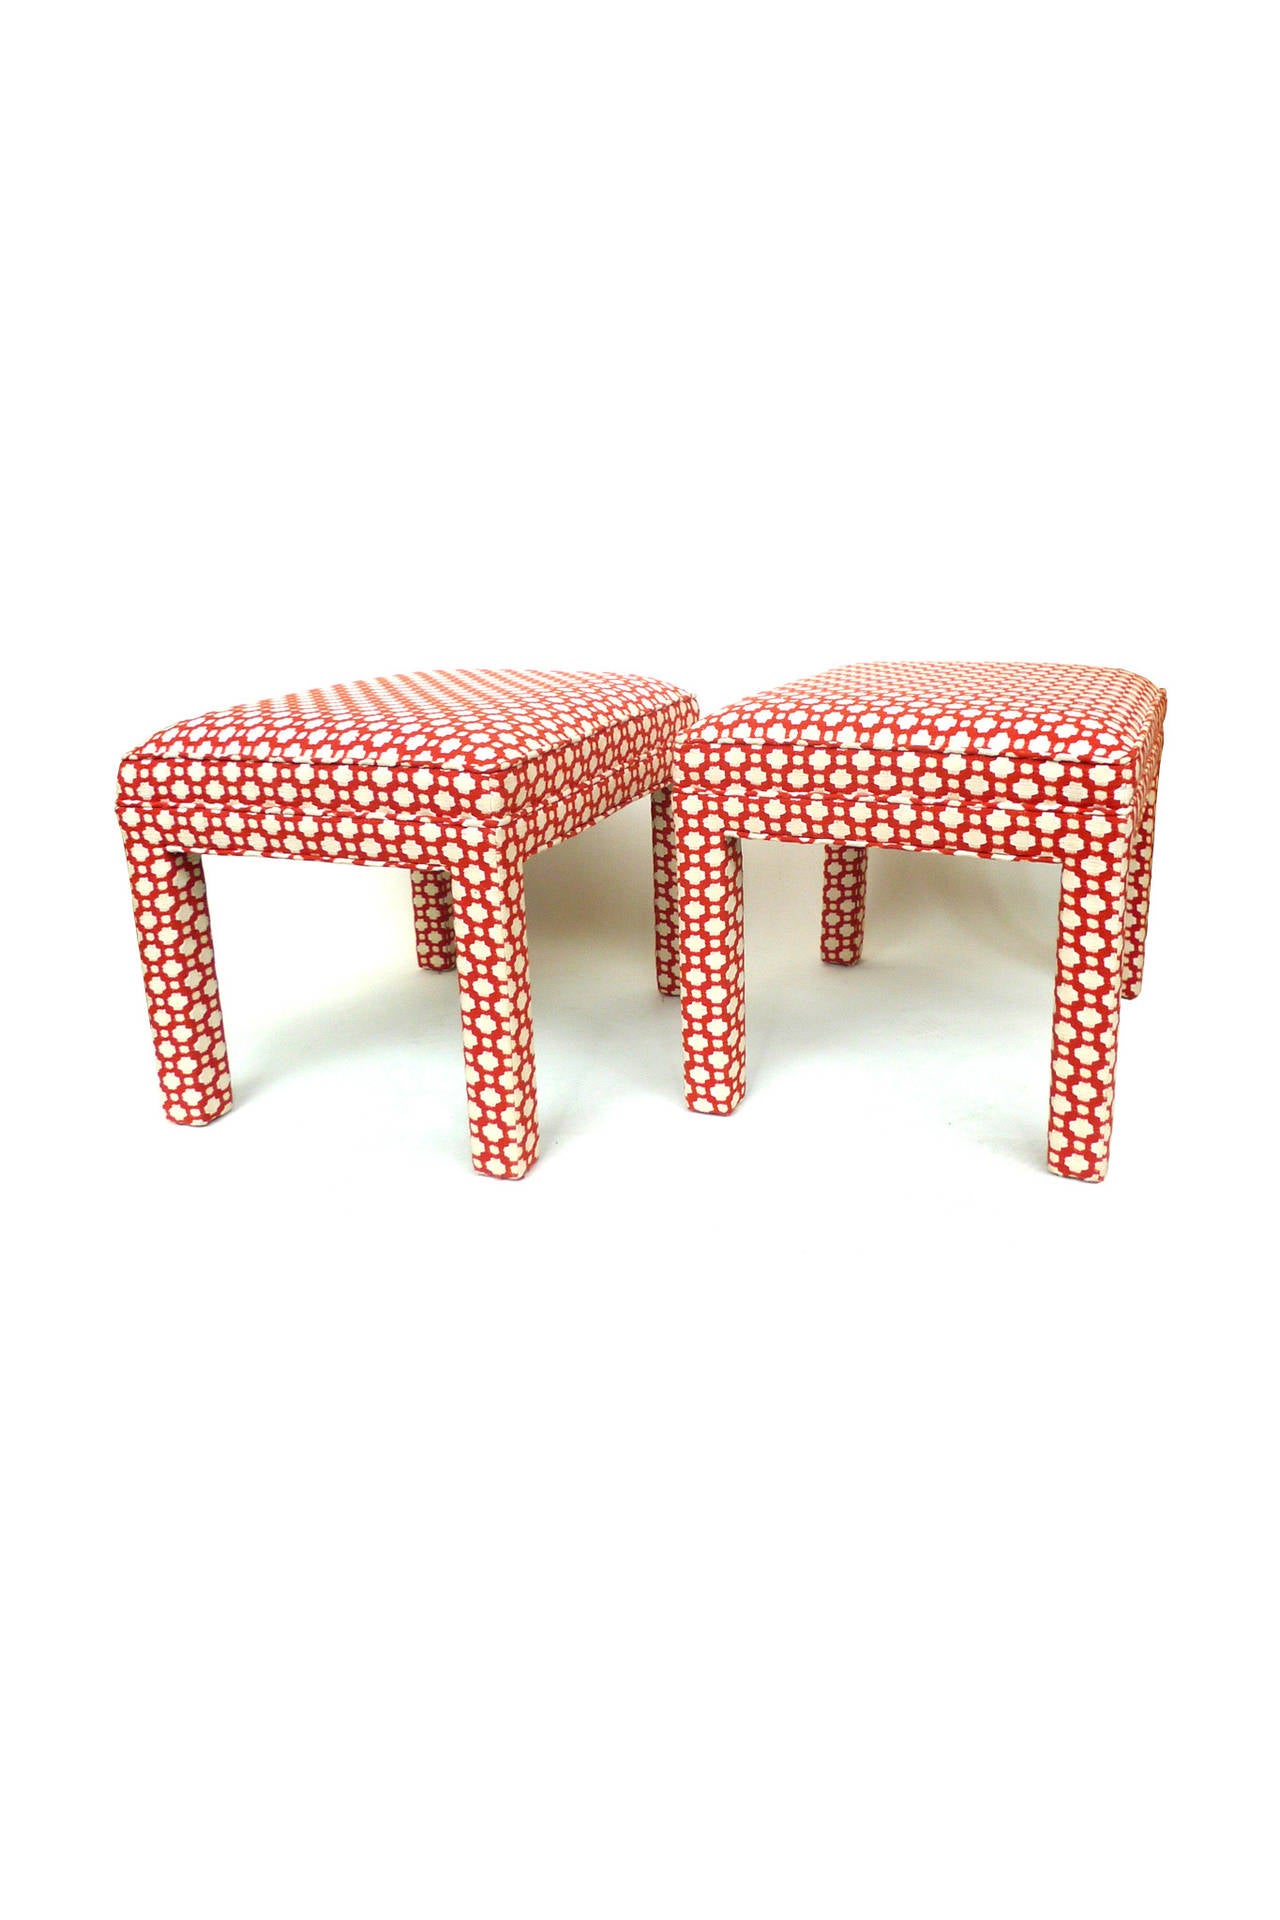 These bench ottomans are custom-designed by Celerie Kemble. The richly textured orange-and-white upholstery is Schumacher fabric and covers the entire surface of each bench. The pair is comfortably cushioned. They are perfect for a space in need of